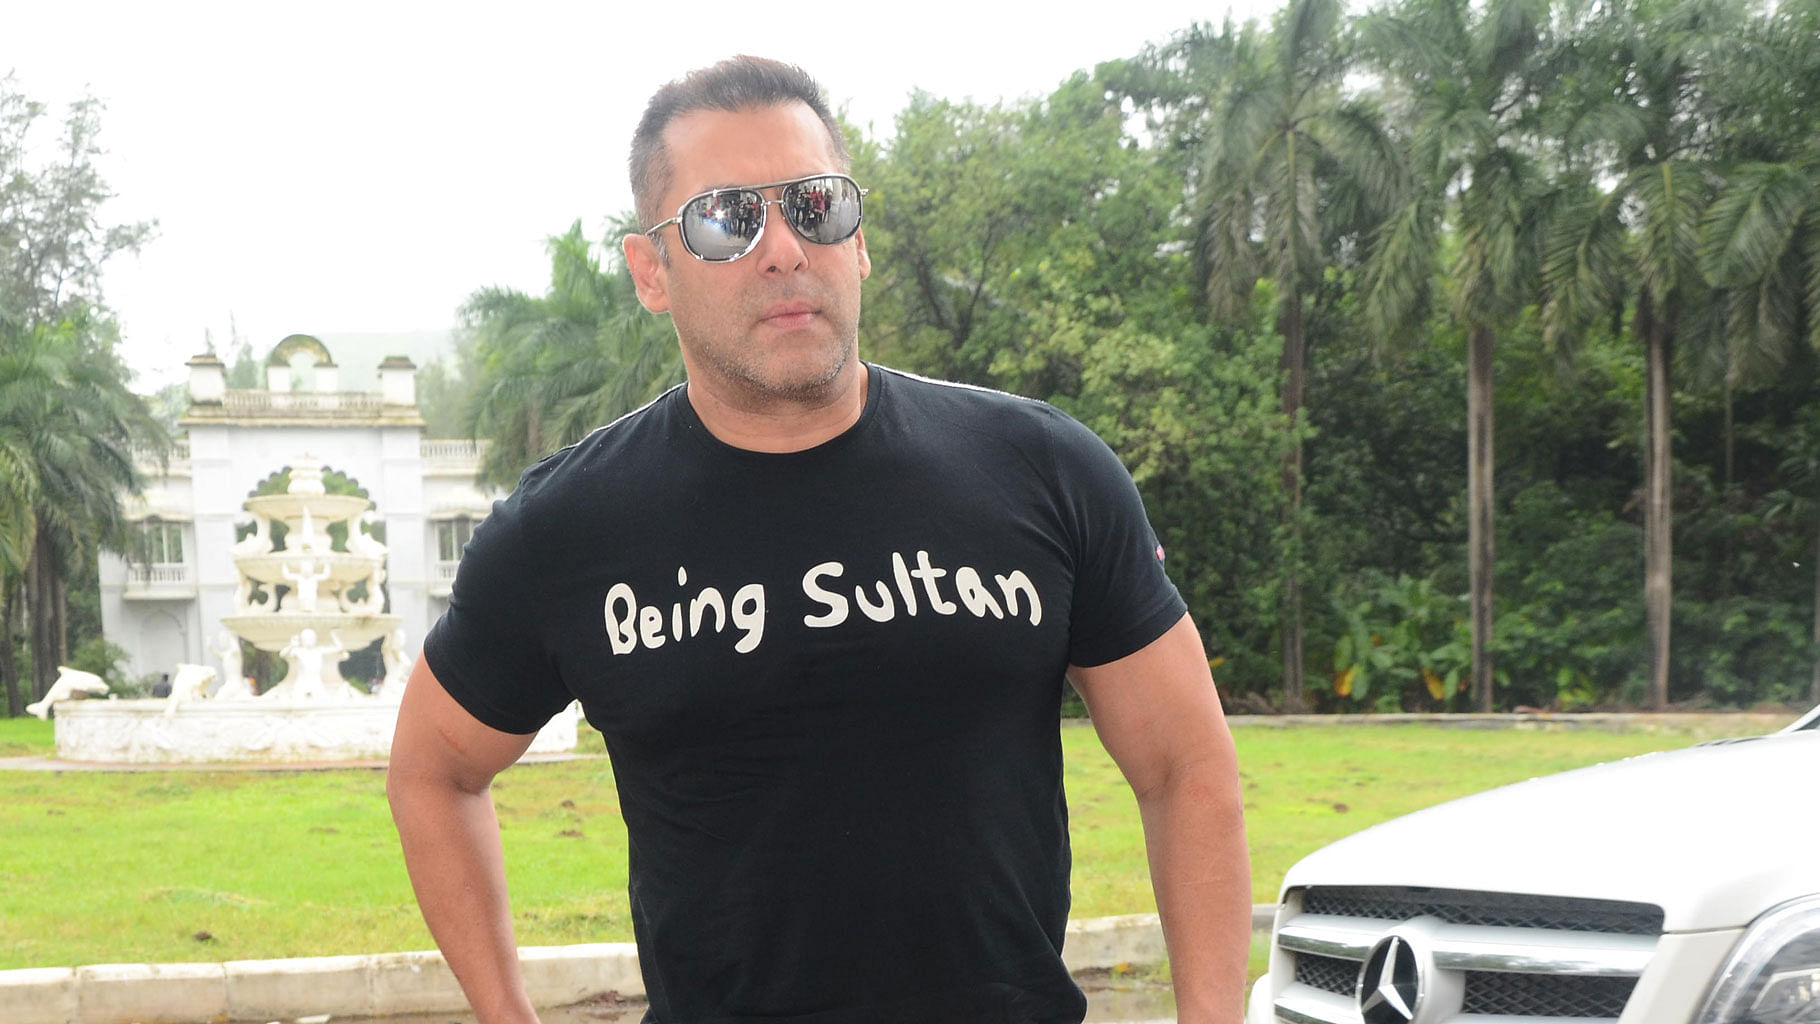 Salman Khan says his wedding date will be 18 November, but he’s not sure of the year yet. (Photo: Yogen Shah)